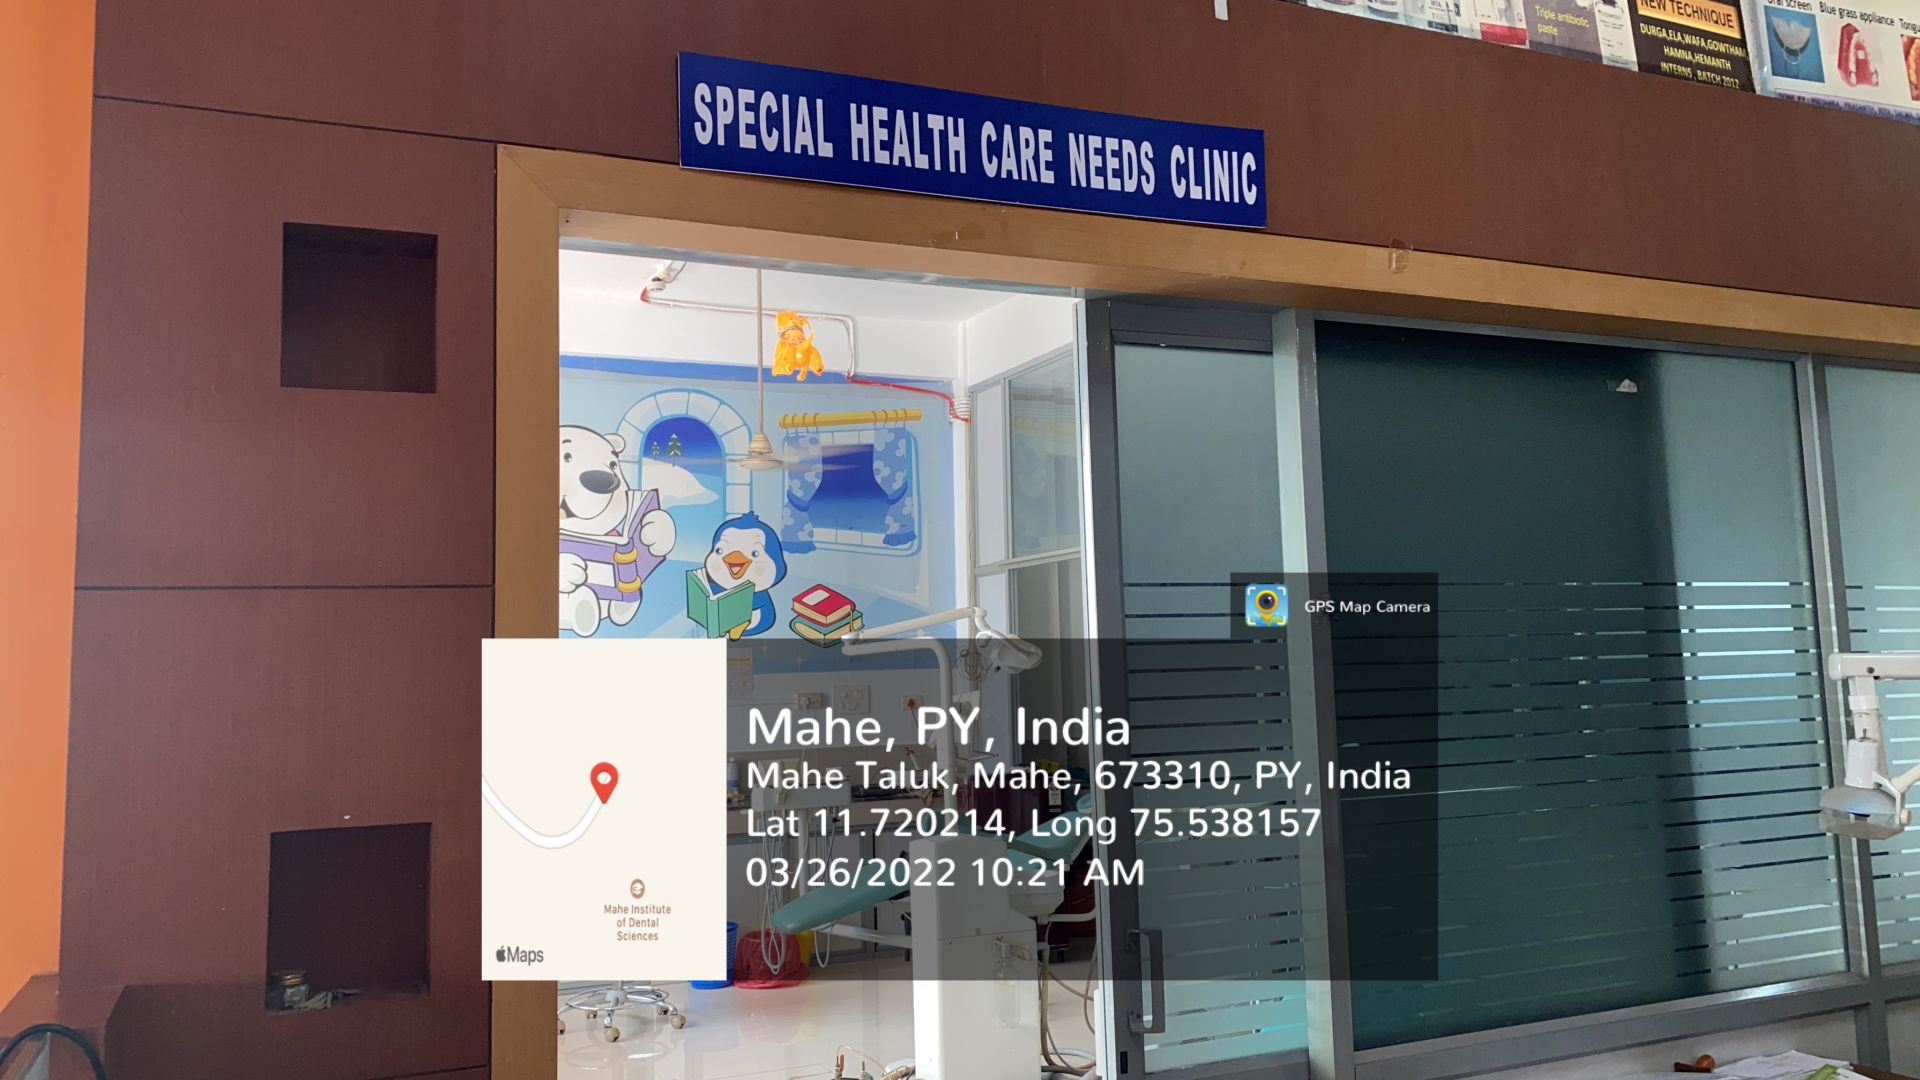 SPECIAL HEALTH CARE NEEDS CLINIC